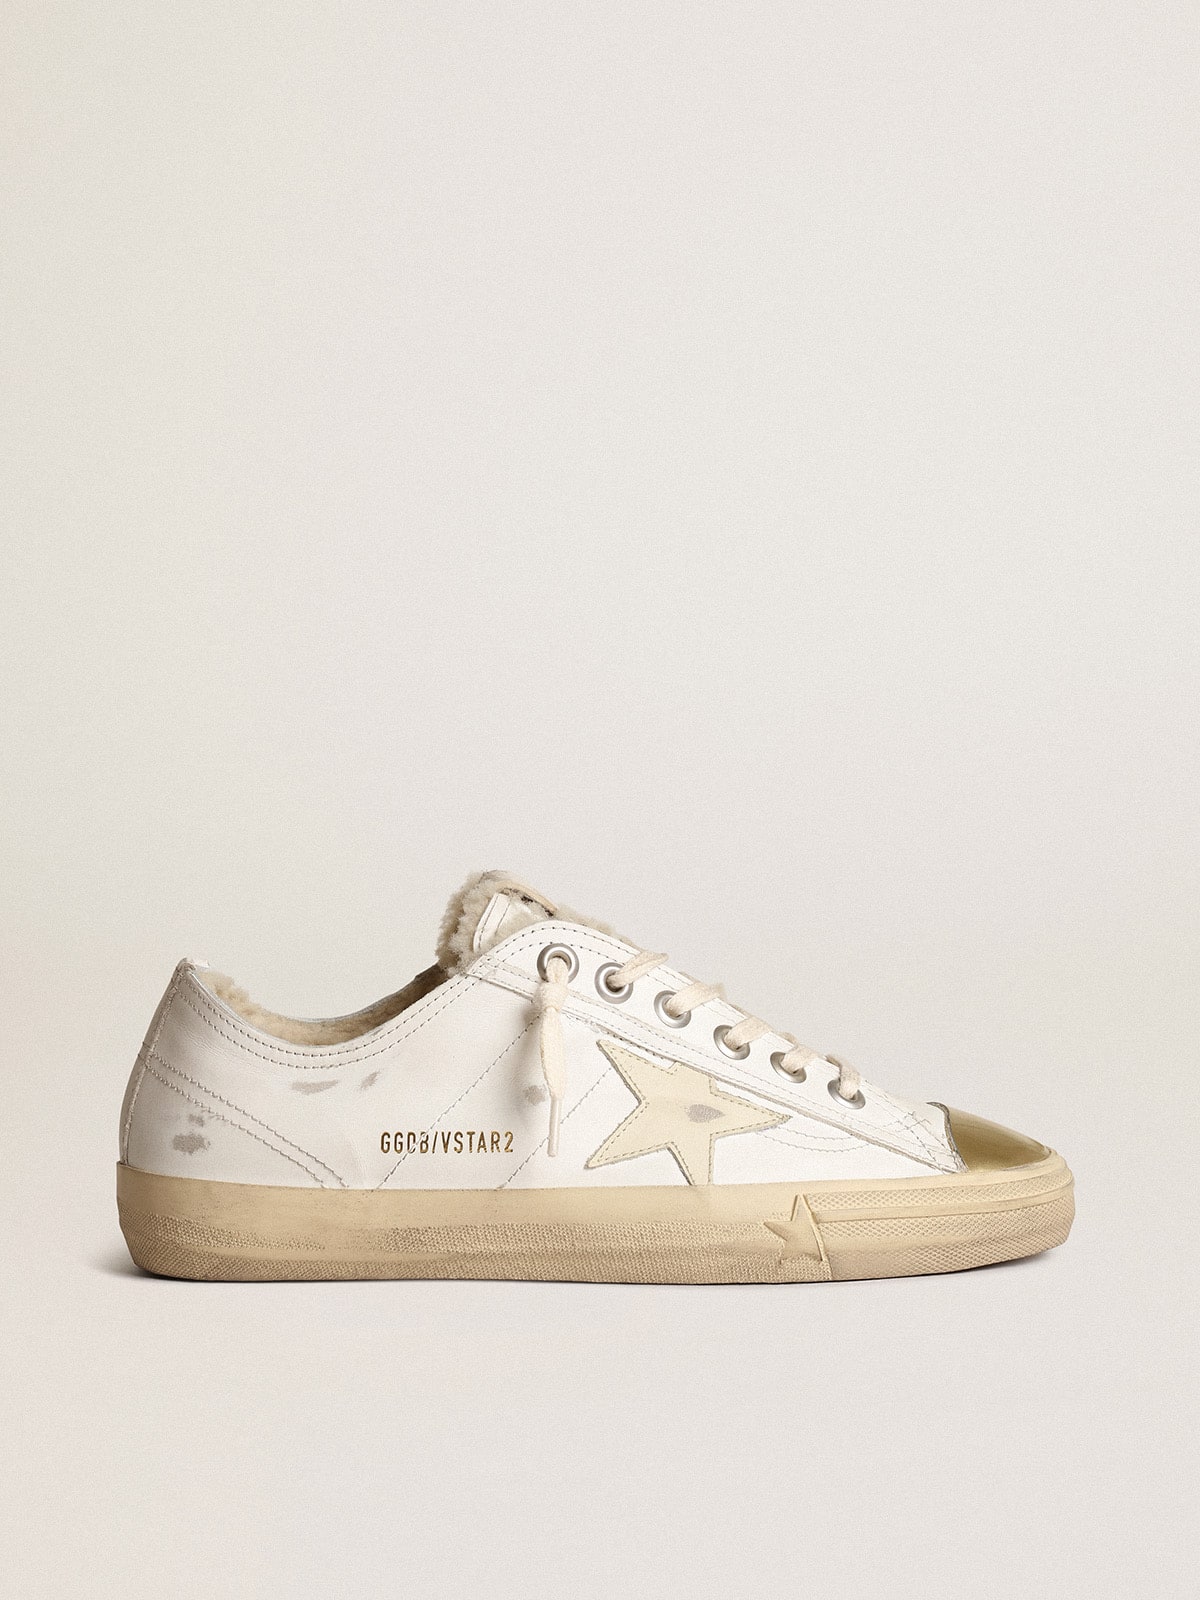 V-Star sneakers with leather star and beige shearling lining